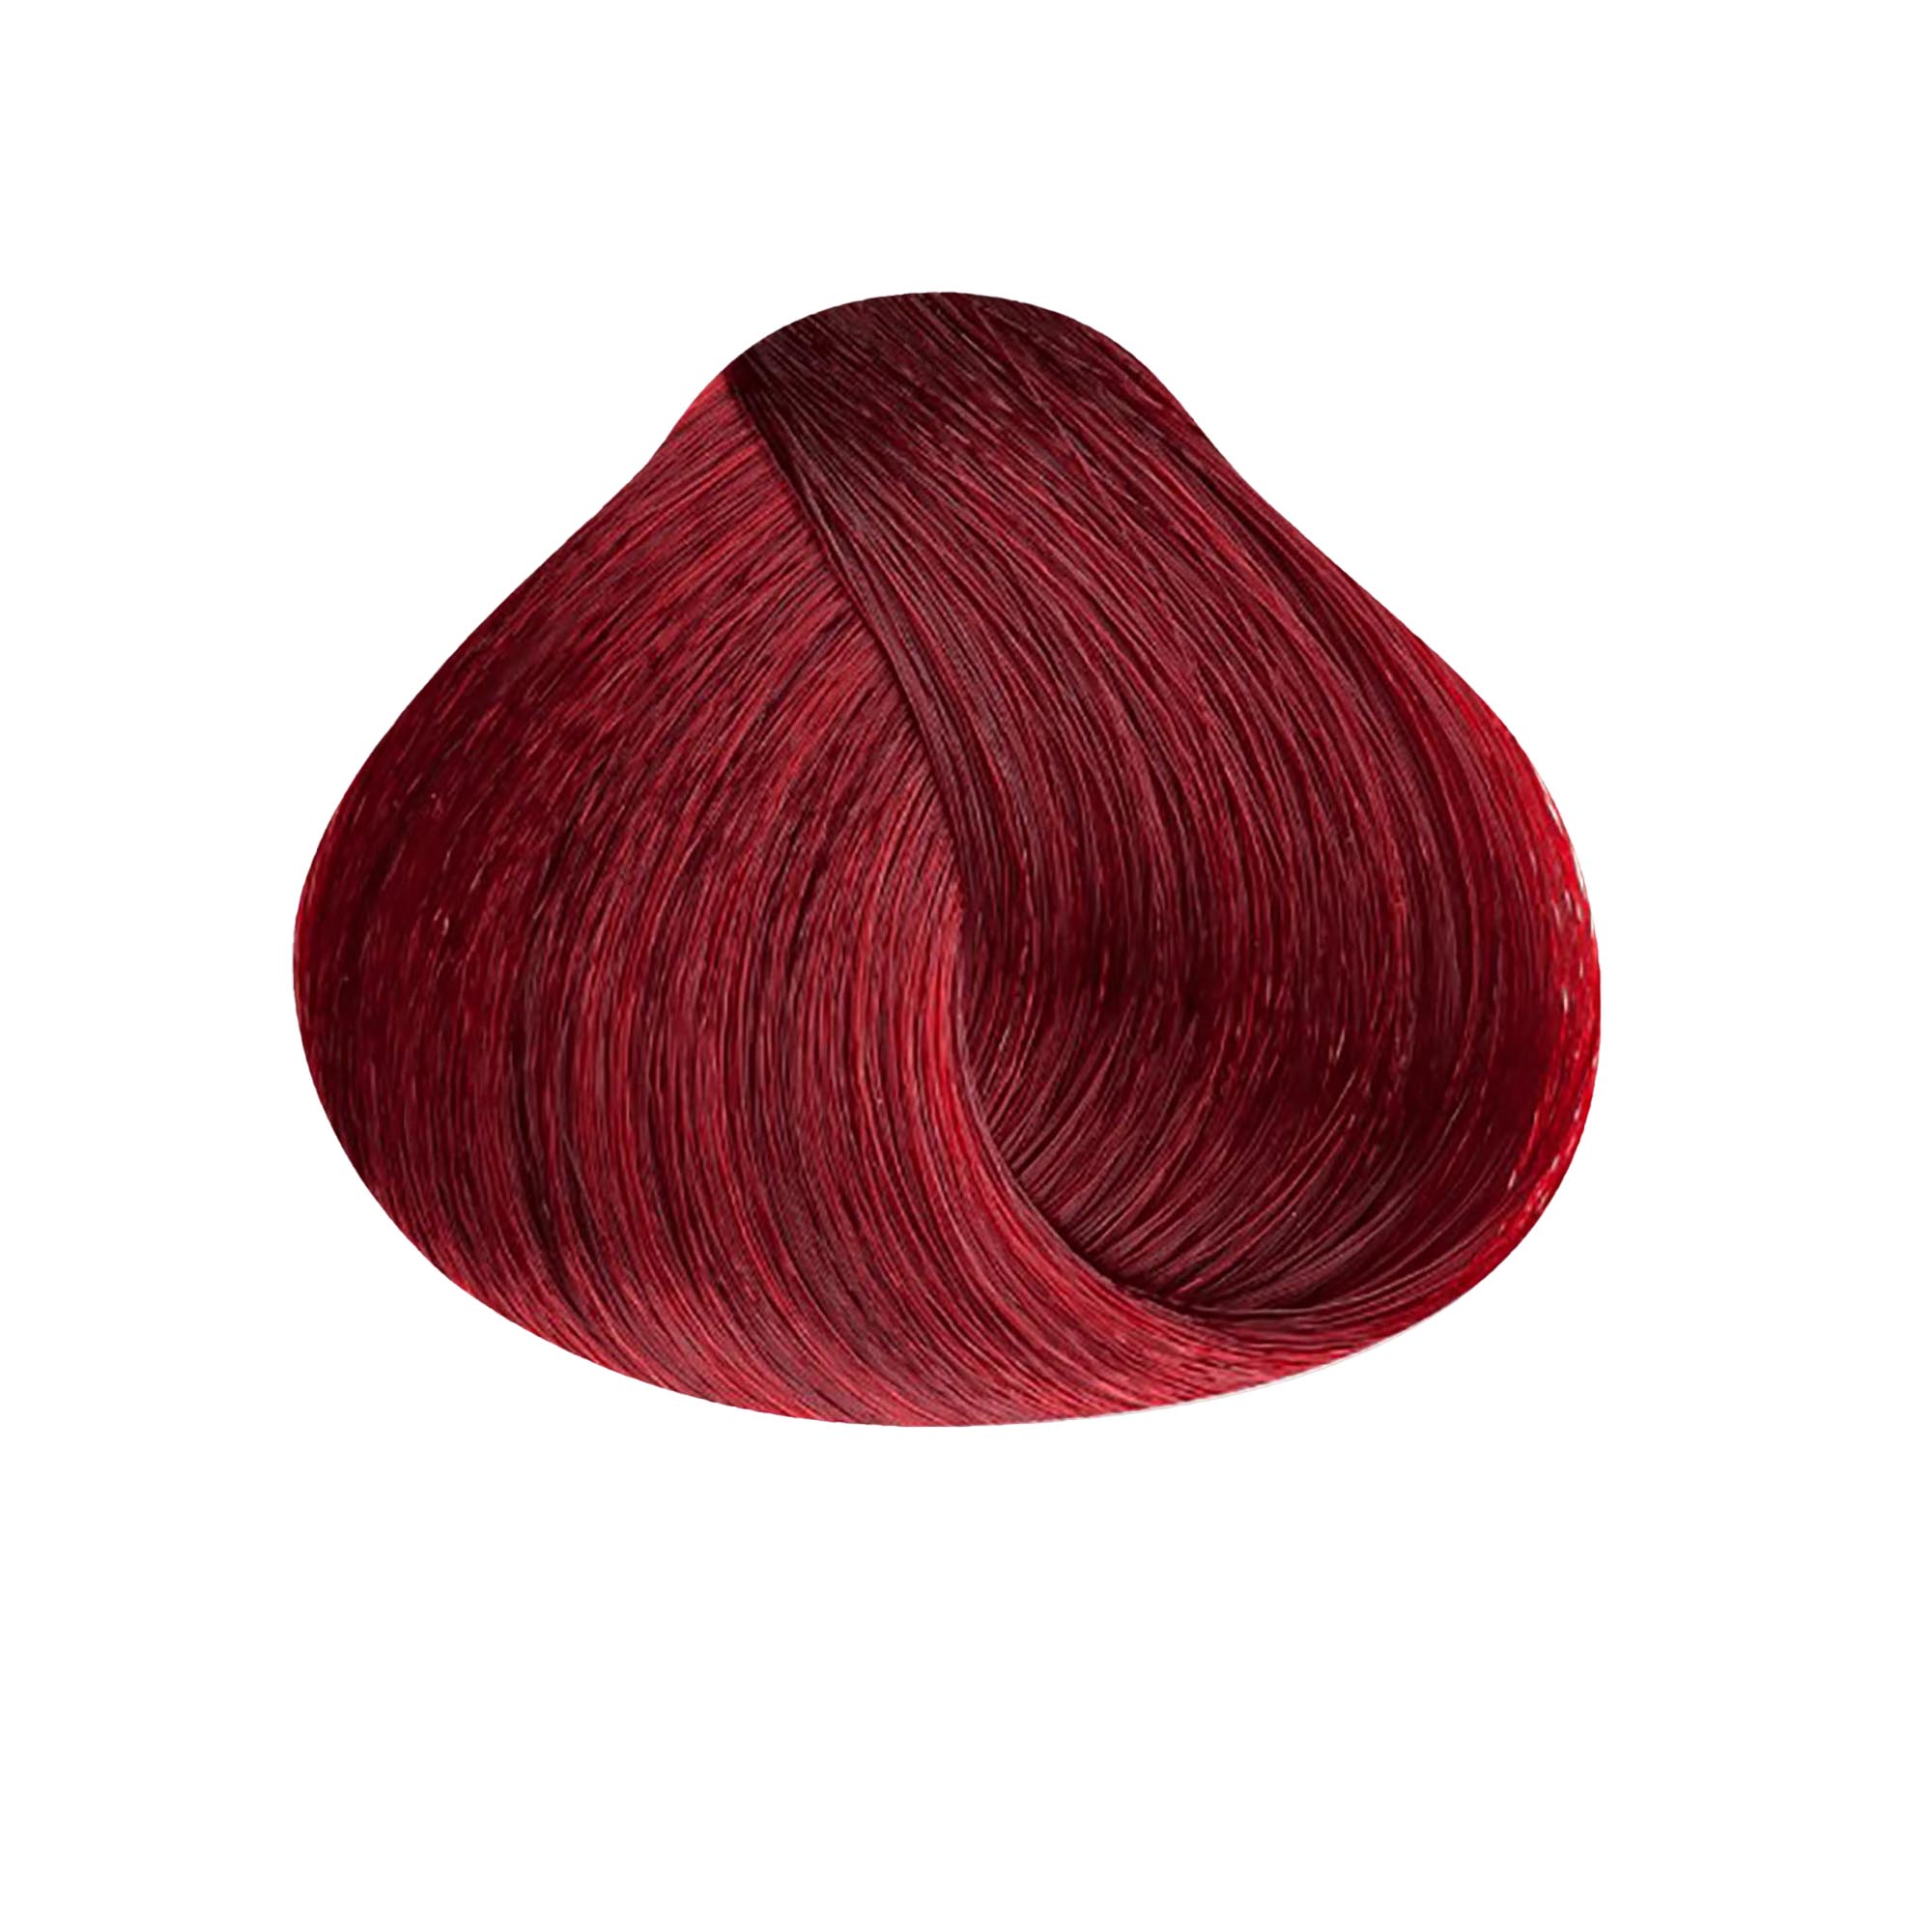 Satin Professional Hair Color / 7MR Red Mahogany Blonde